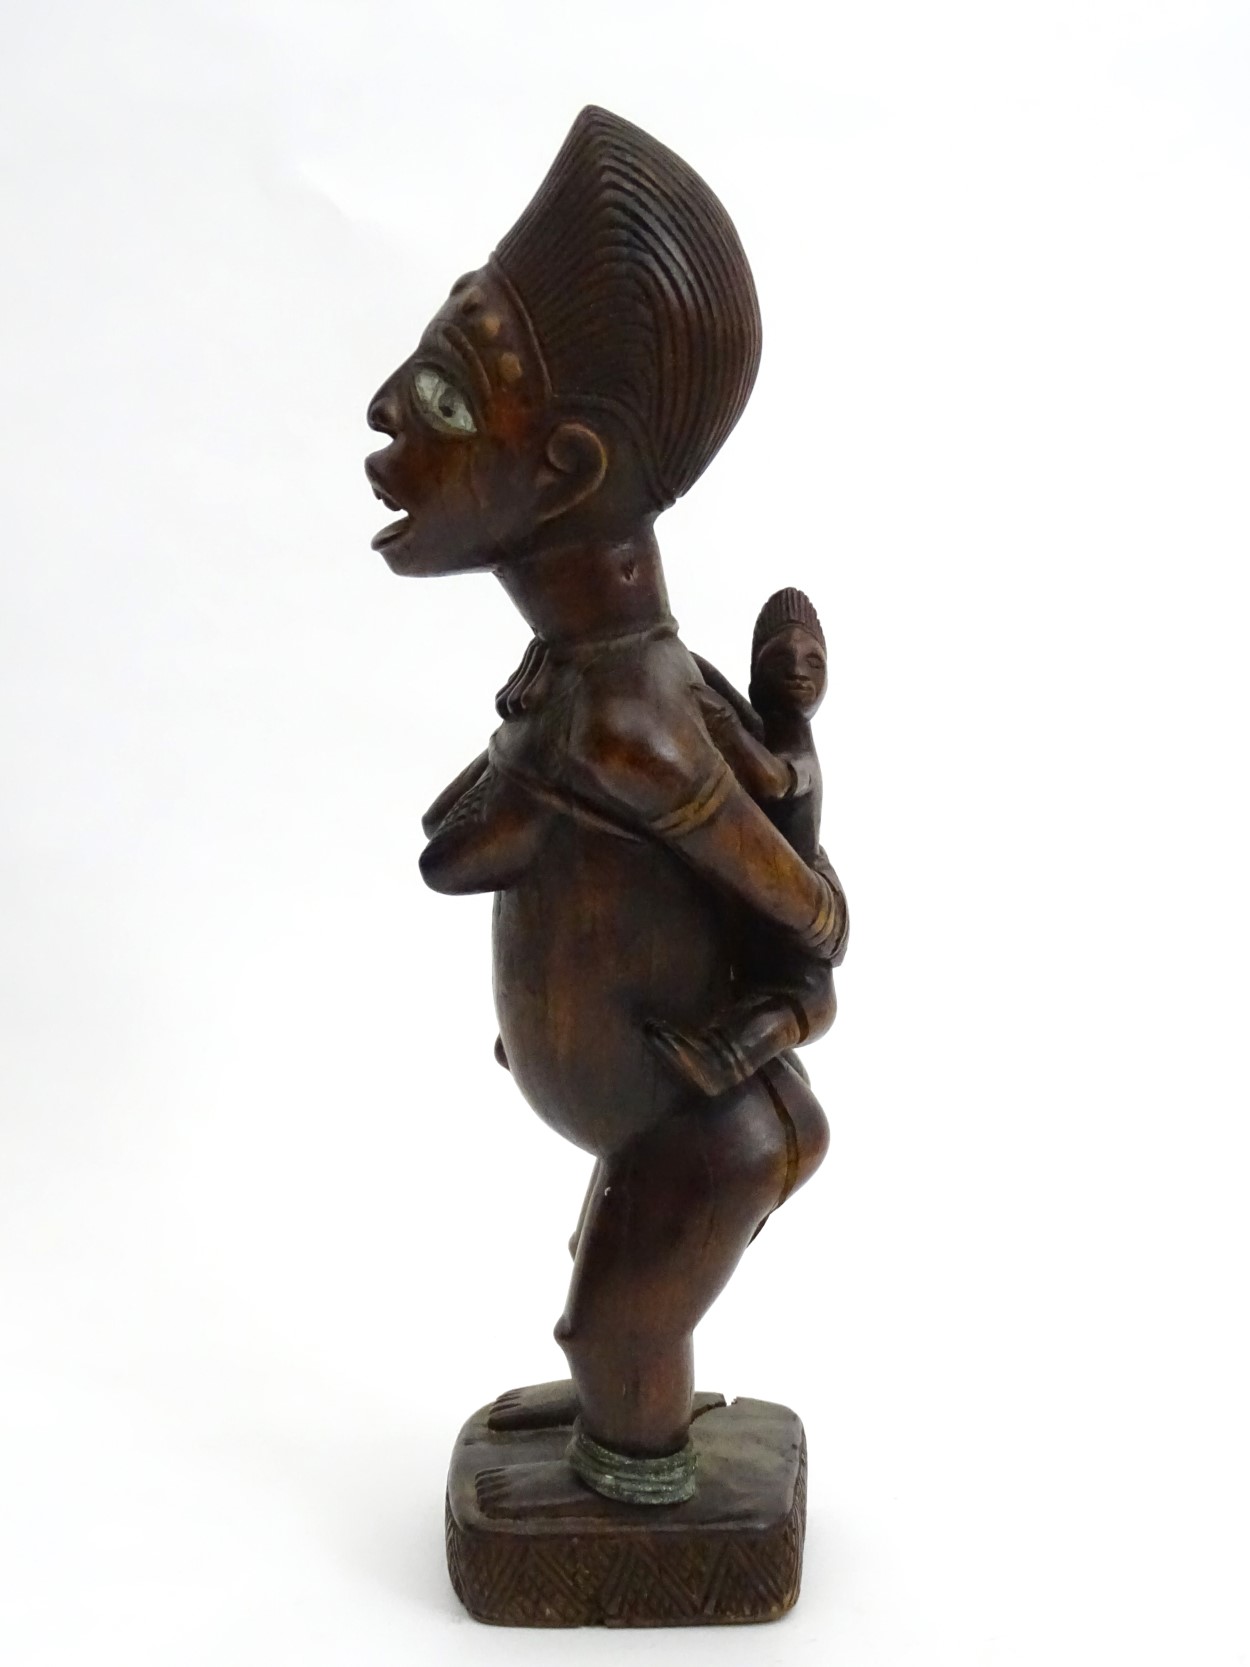 Tribal : An Ethnographic Native Tribal Kongo maternity figure. Approx. 18 1/2" high. - Image 7 of 11